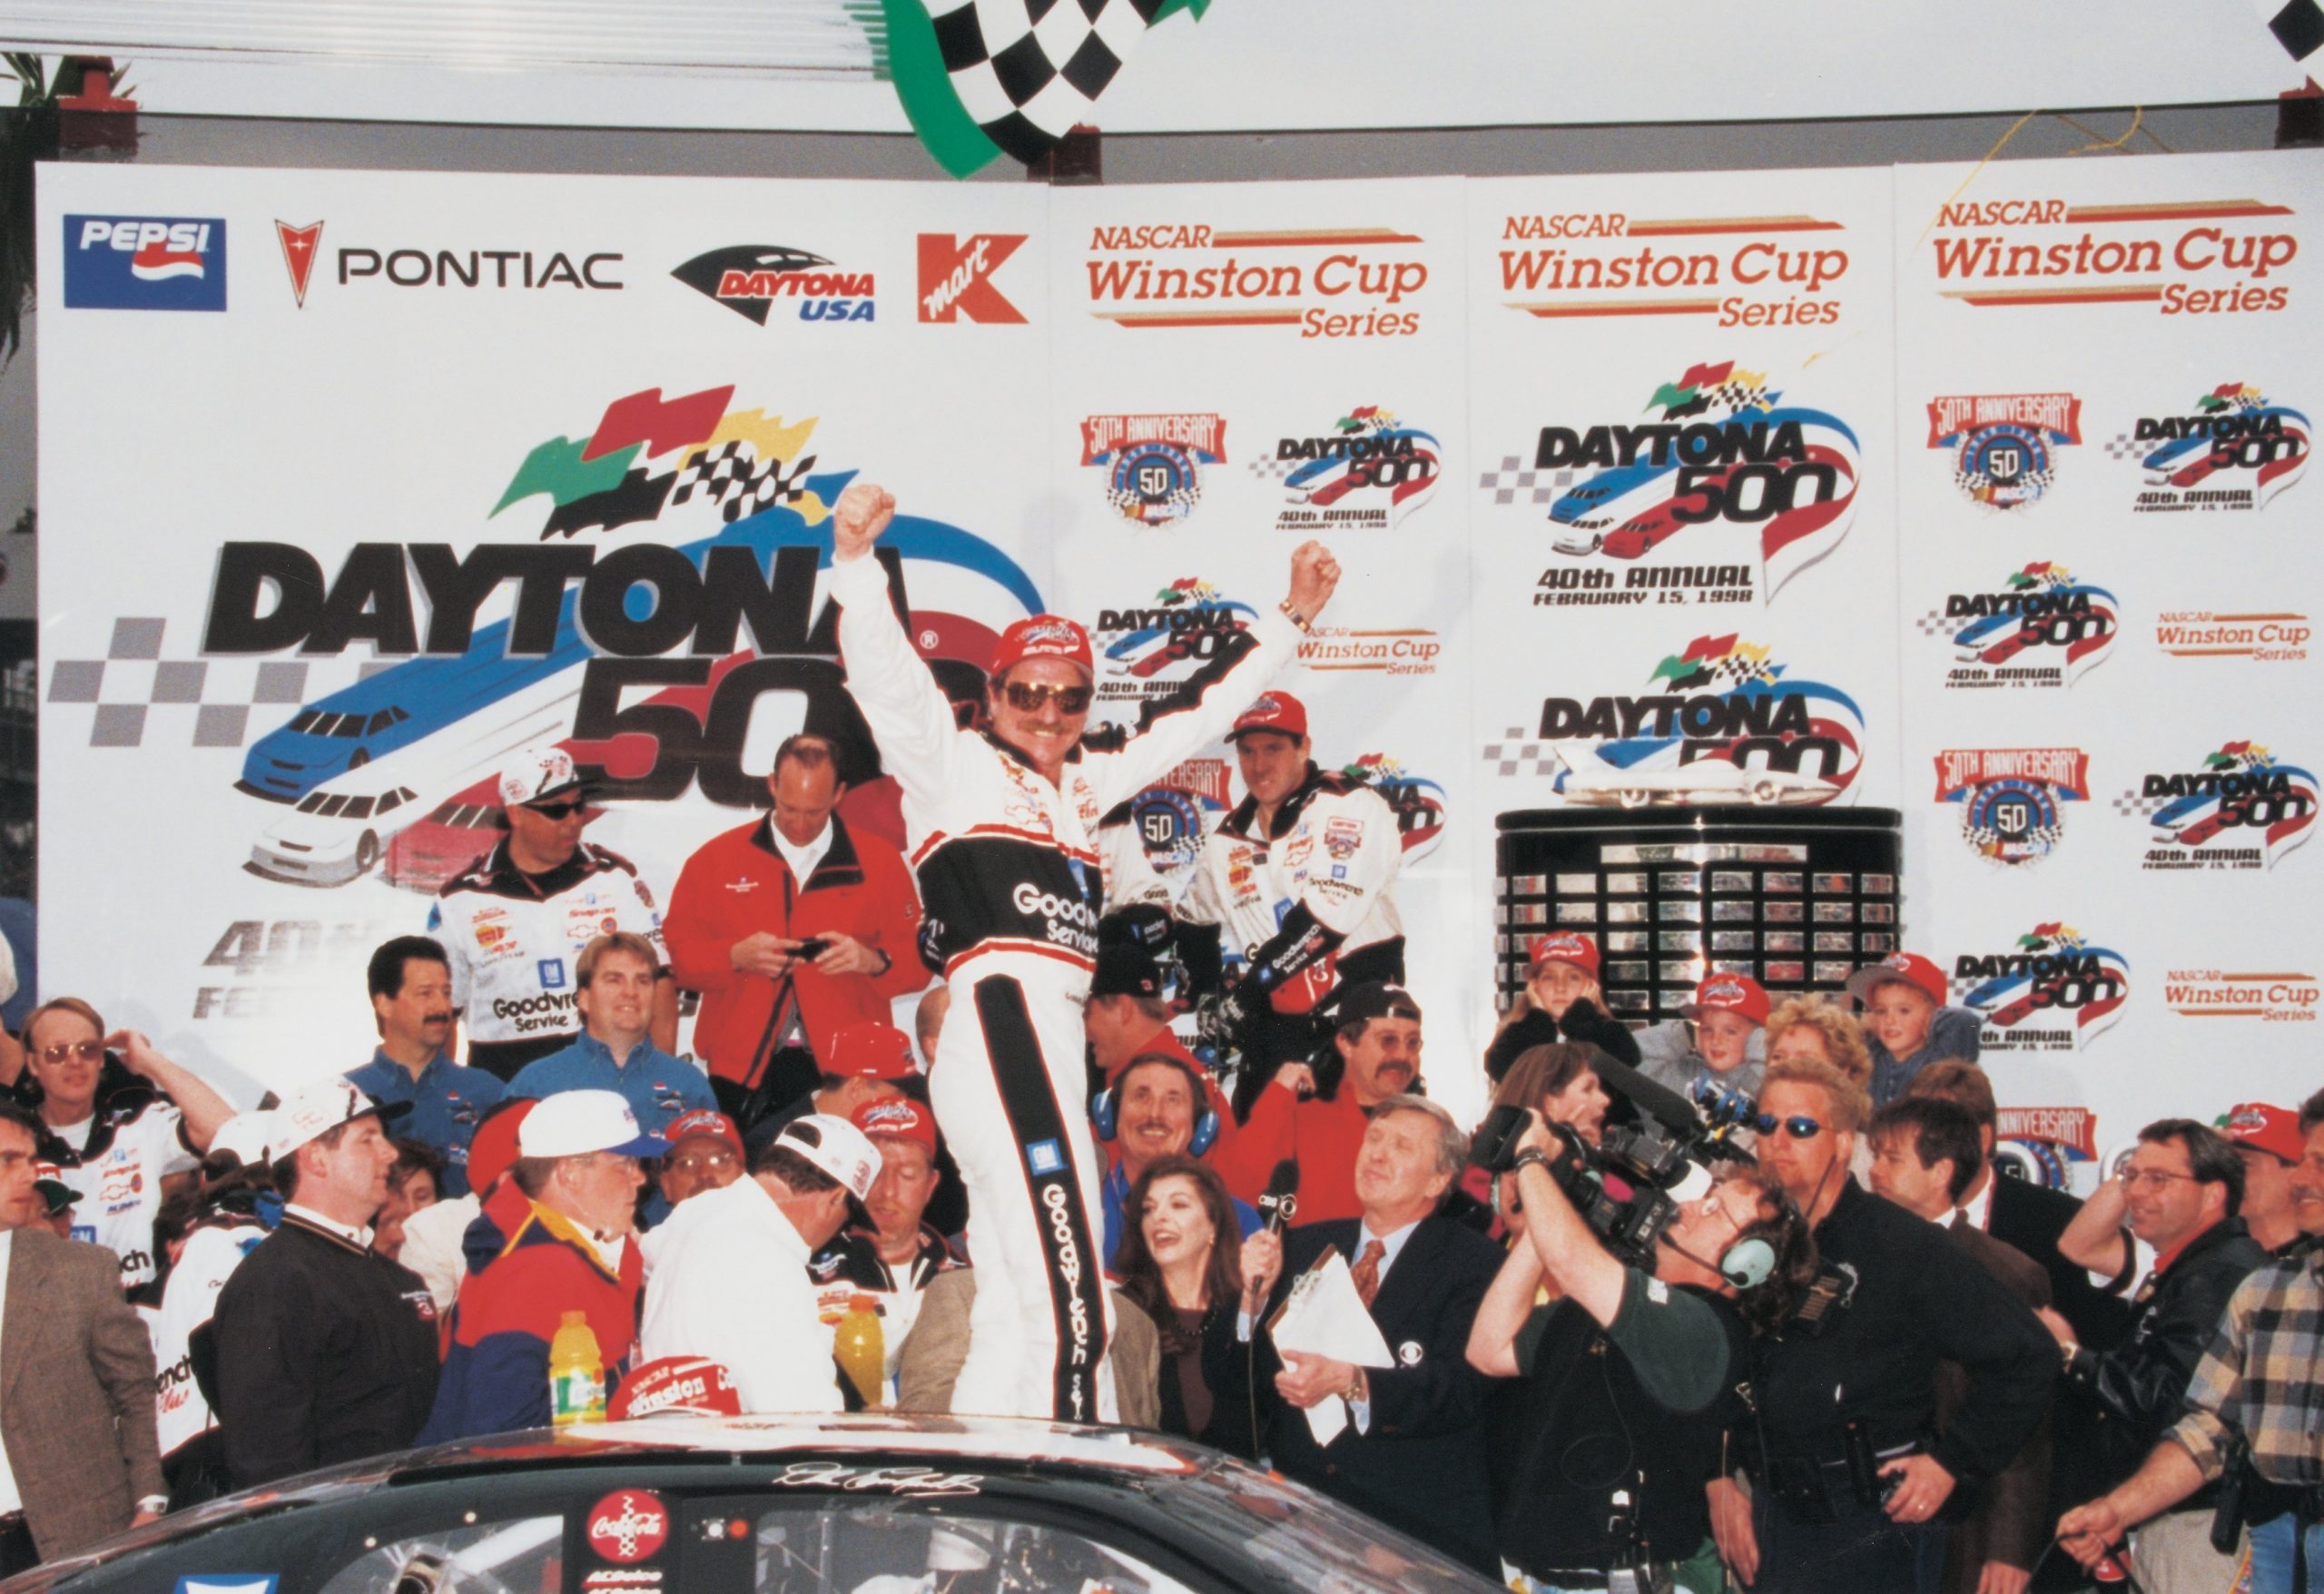 Dale Earnhardt brought the donut celebration to NASCAR in 1998.